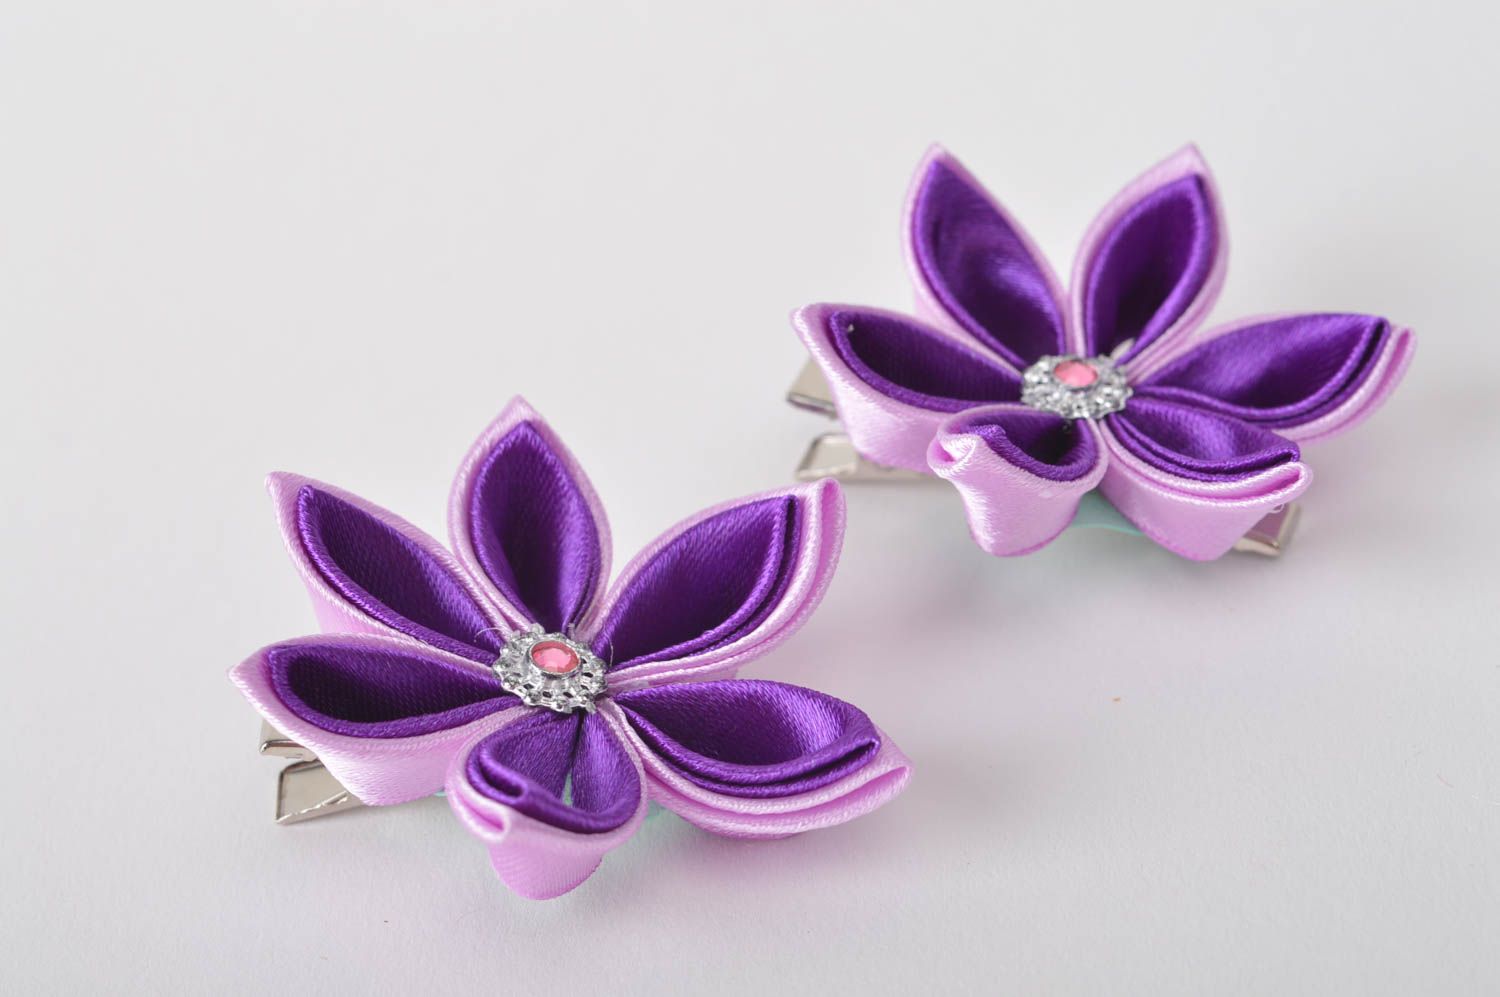 Handmade hair clips for kids stylish kanzashi hair clips 2 pieces violets photo 3